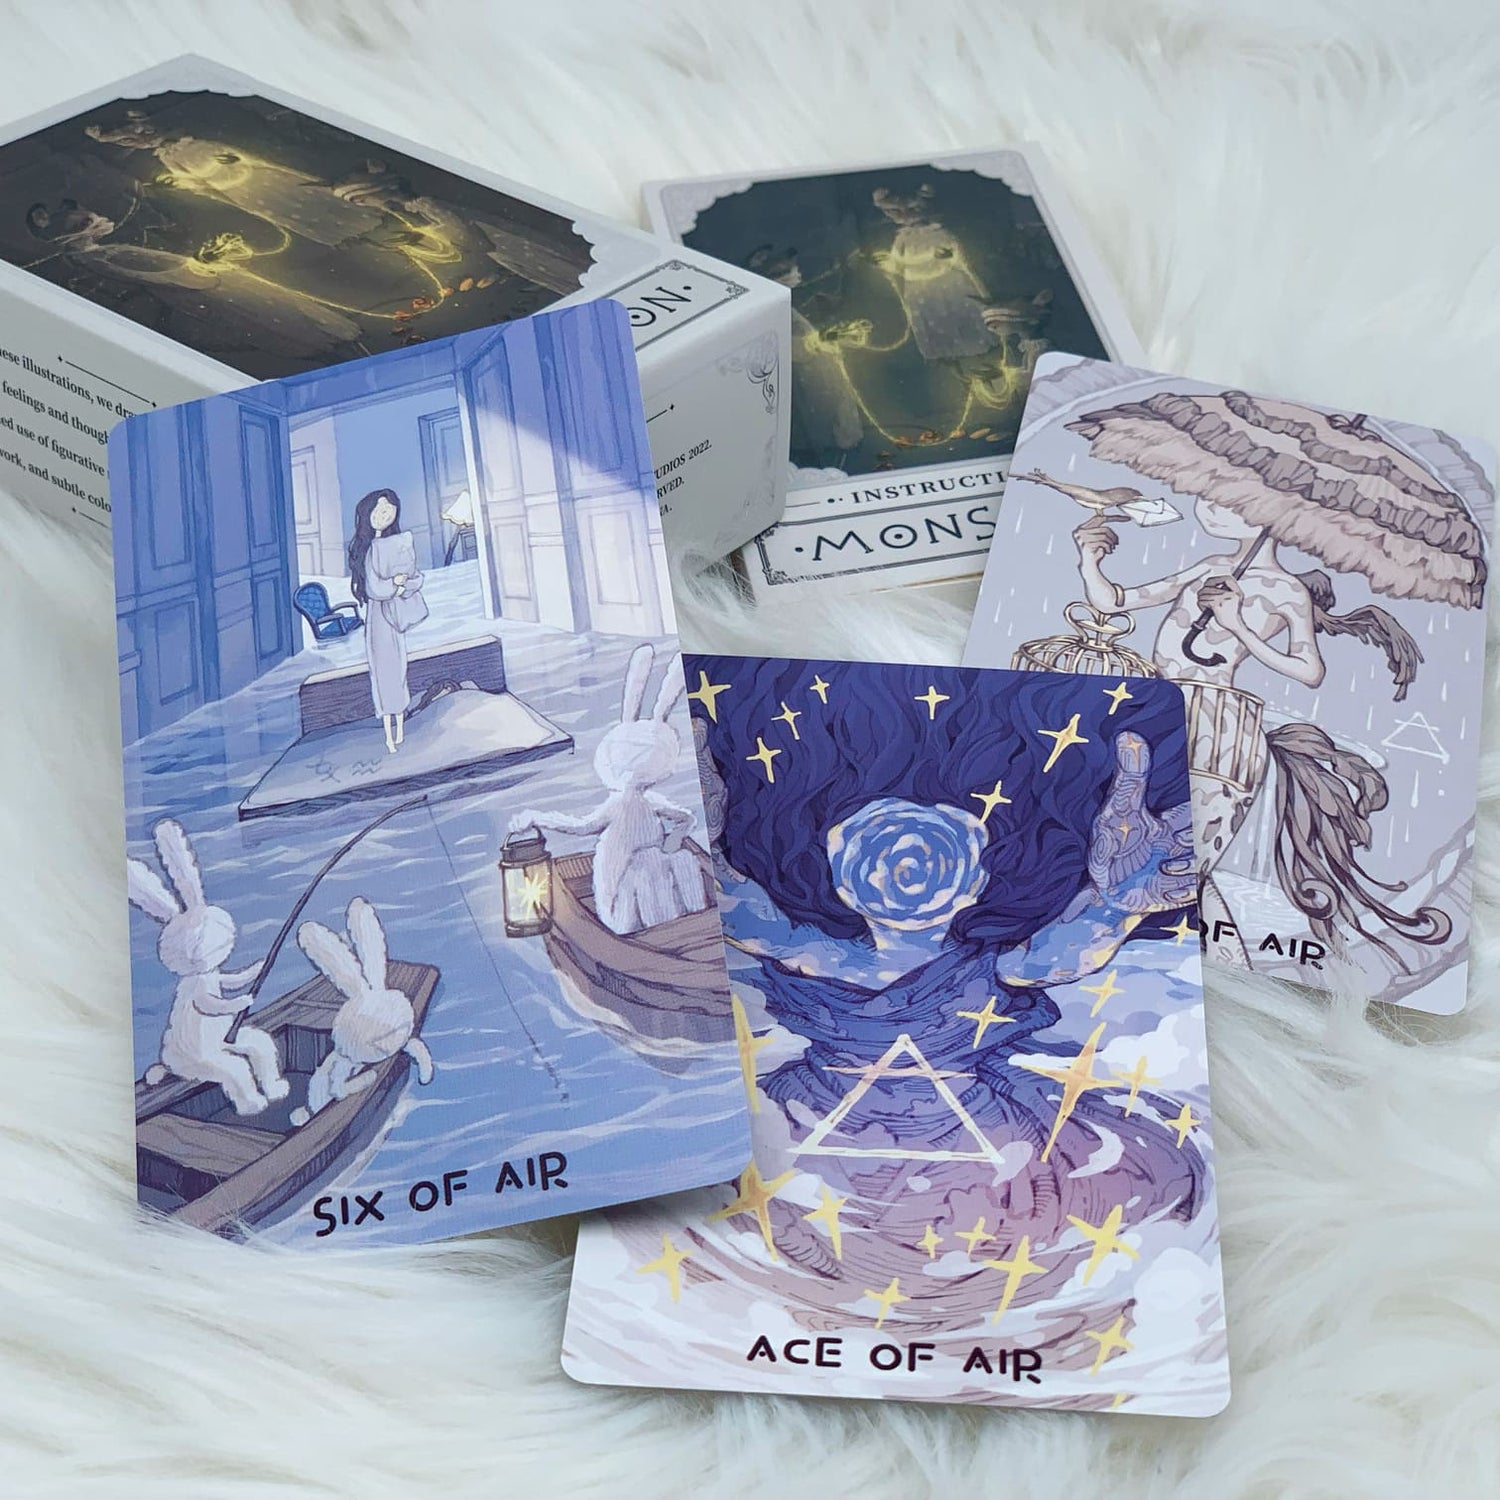 The deck consists of 22 Major Arcana &amp; 56 Minor Arcana Cards, featuring Japanese-style illustrations of fairies and other magical creatures. It comes with a Guidebook with the descriptions and meanings of the cards.